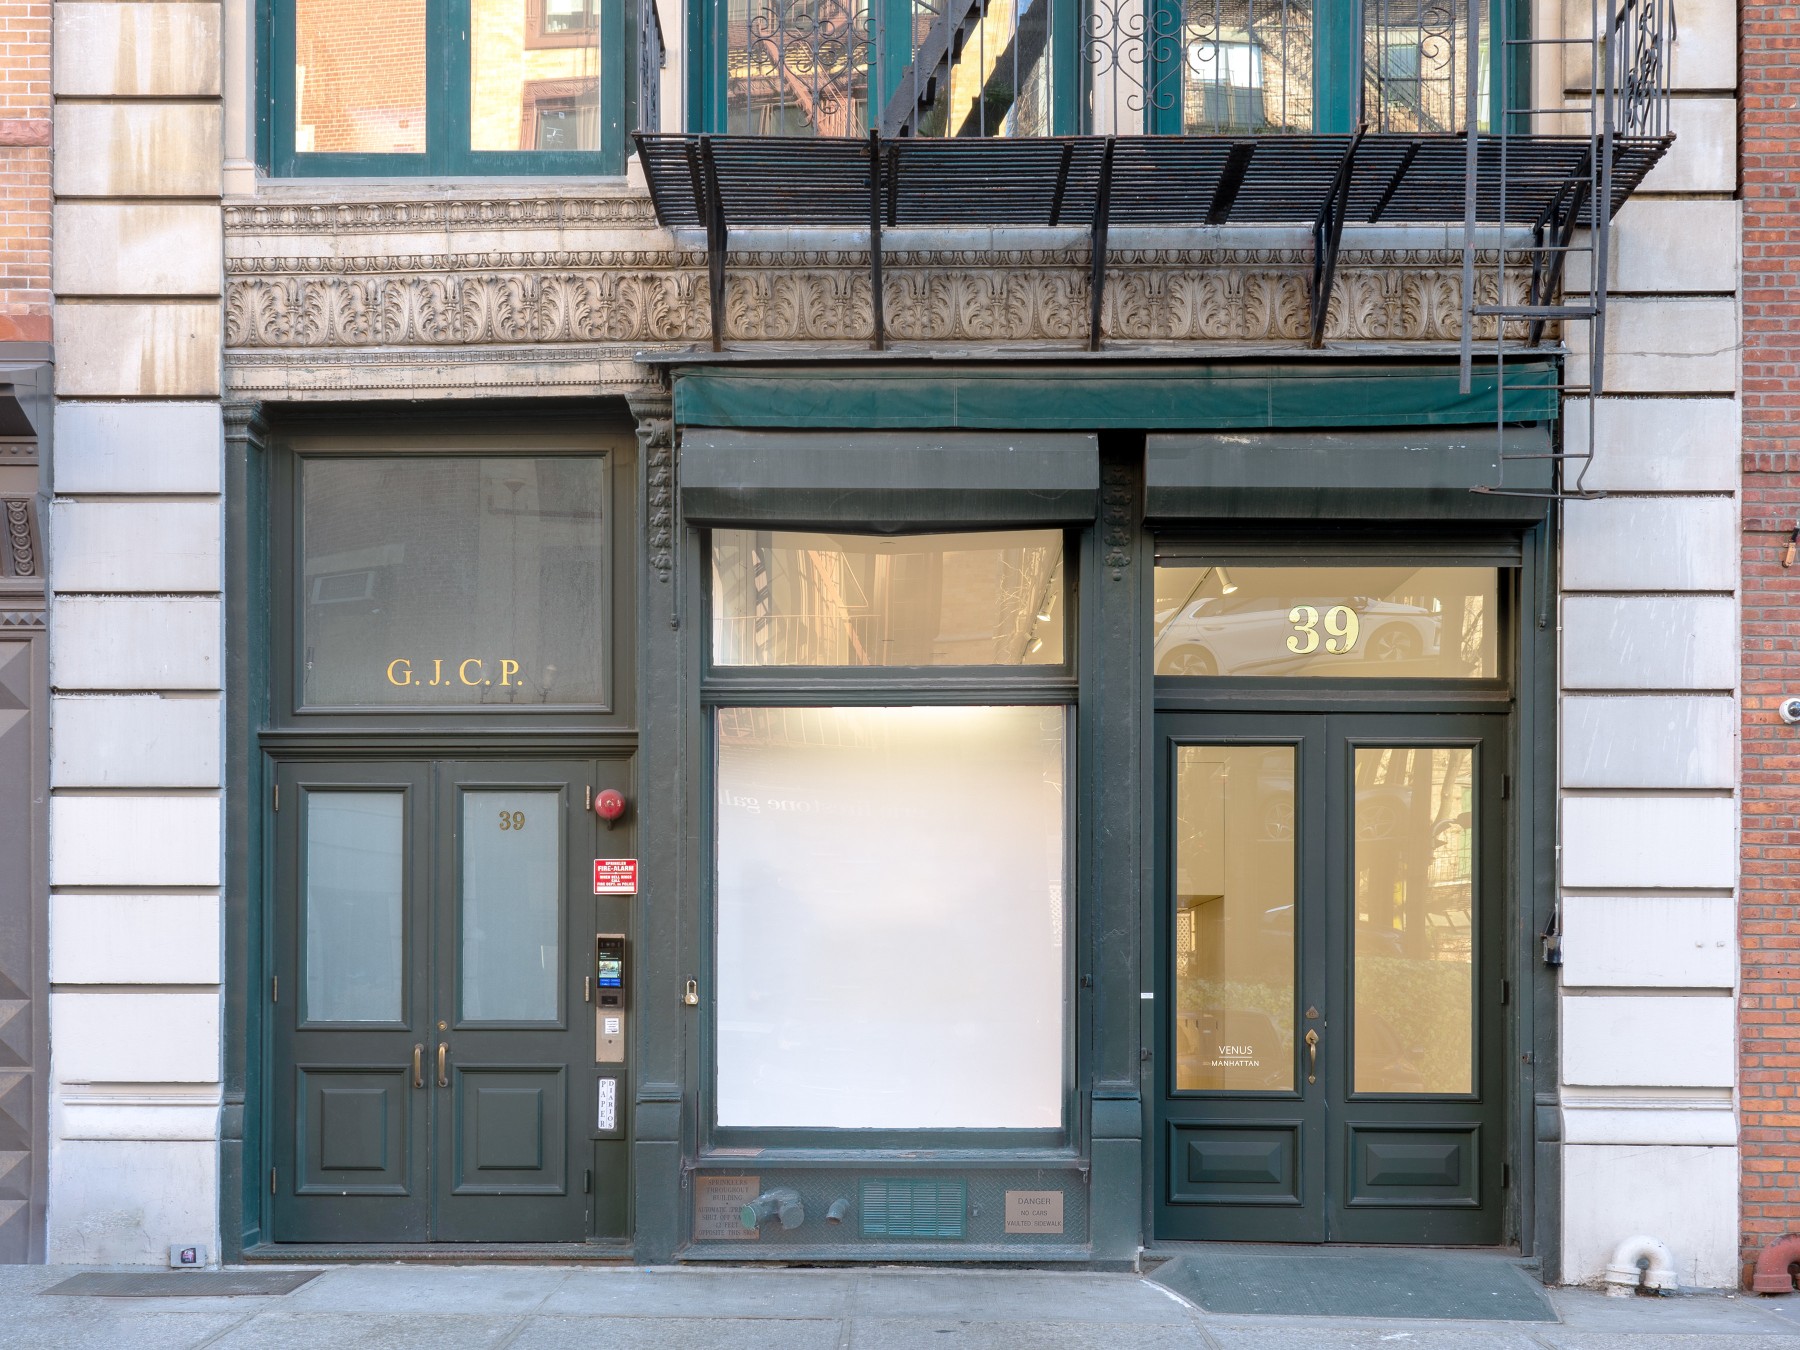 Venus Over Manhattan Expands with Second Downtown Location
39 Great Jones Street

Image link